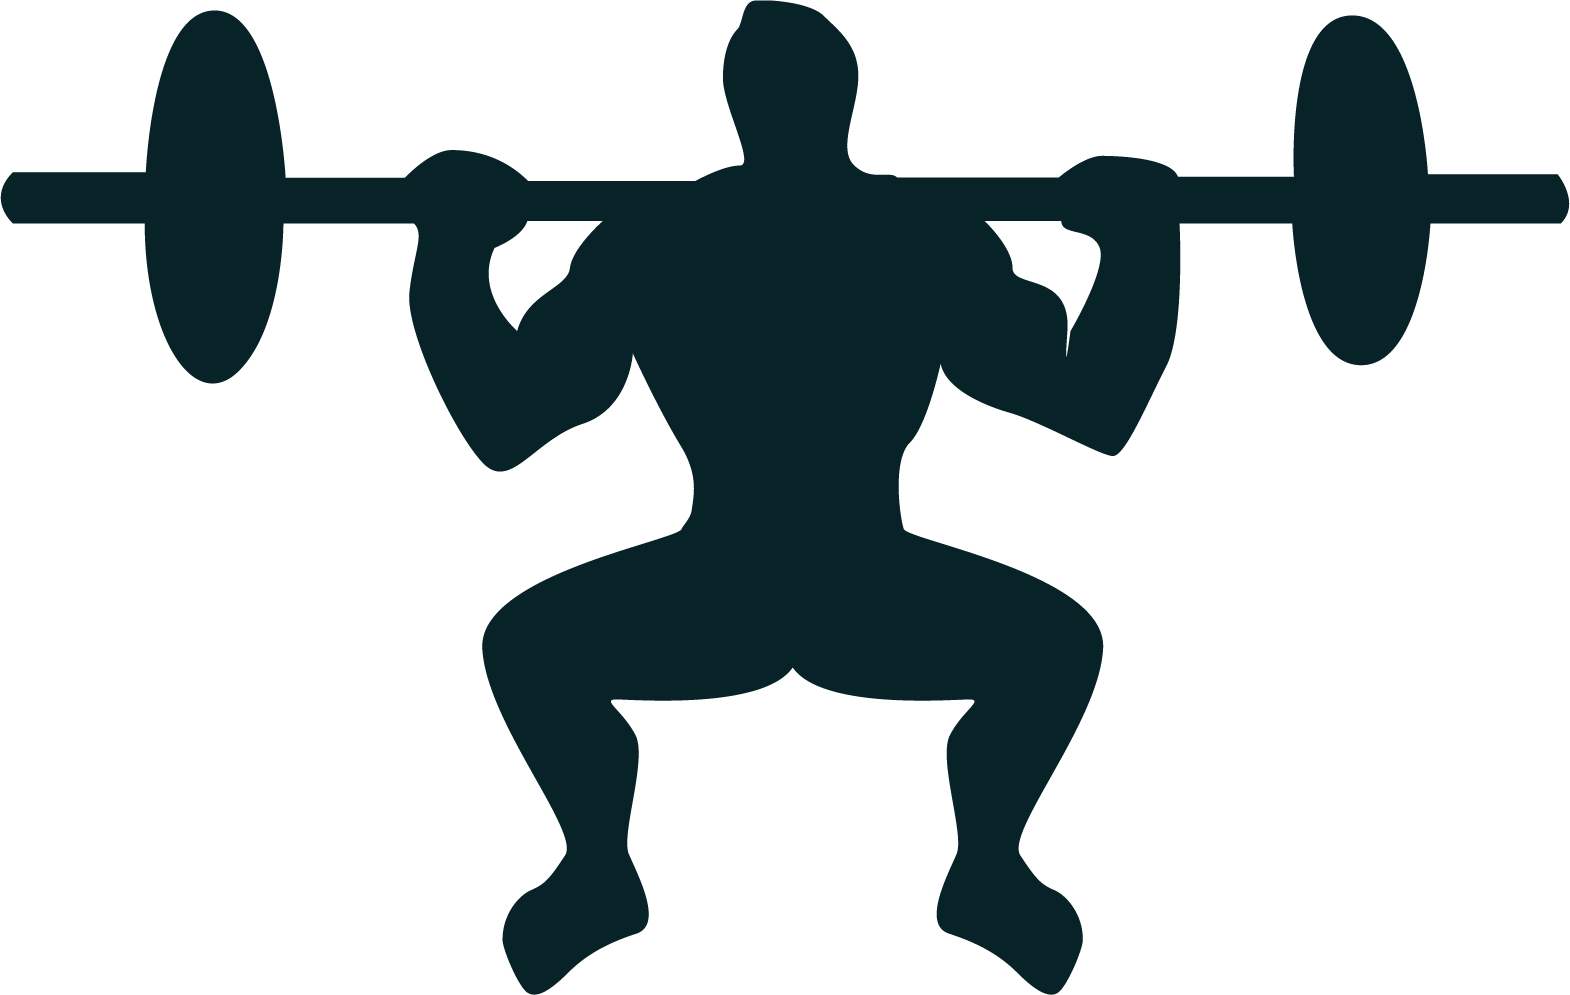 Weightlifting Silhouette Squat Exercise PNG